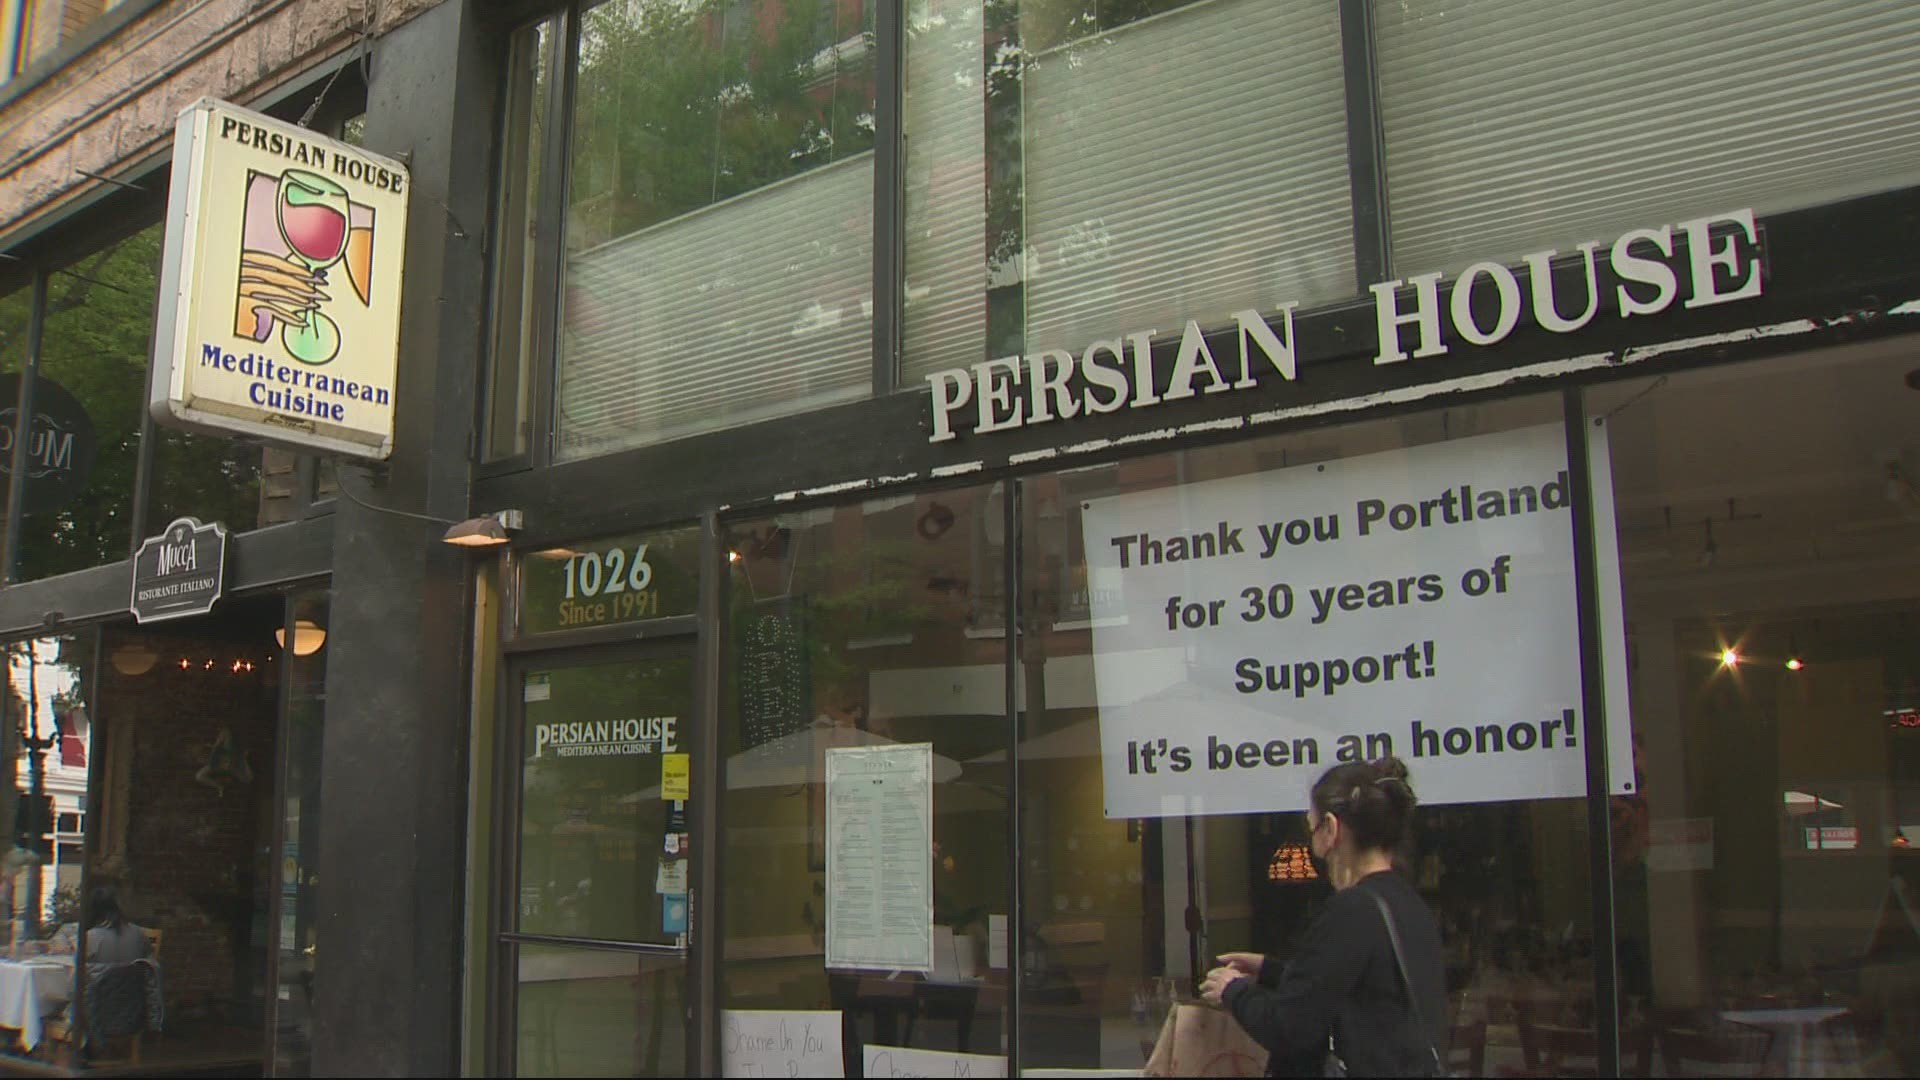 The Persian House has been in downtown Portland for 30 years. It says it hopes to come to an agreement with the landlord that keeps them in business.